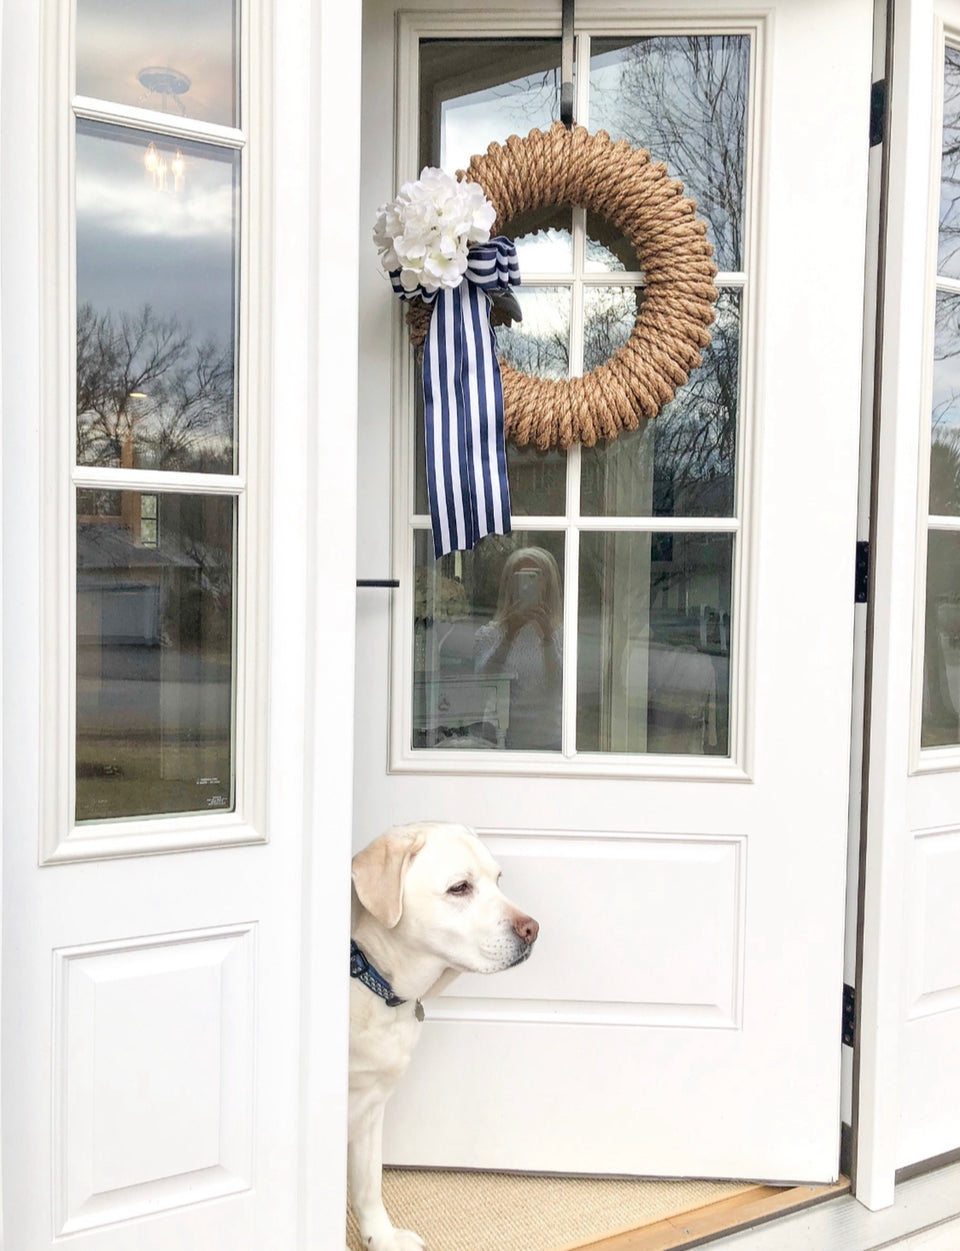 Newport Rope Wreath Accessory Only